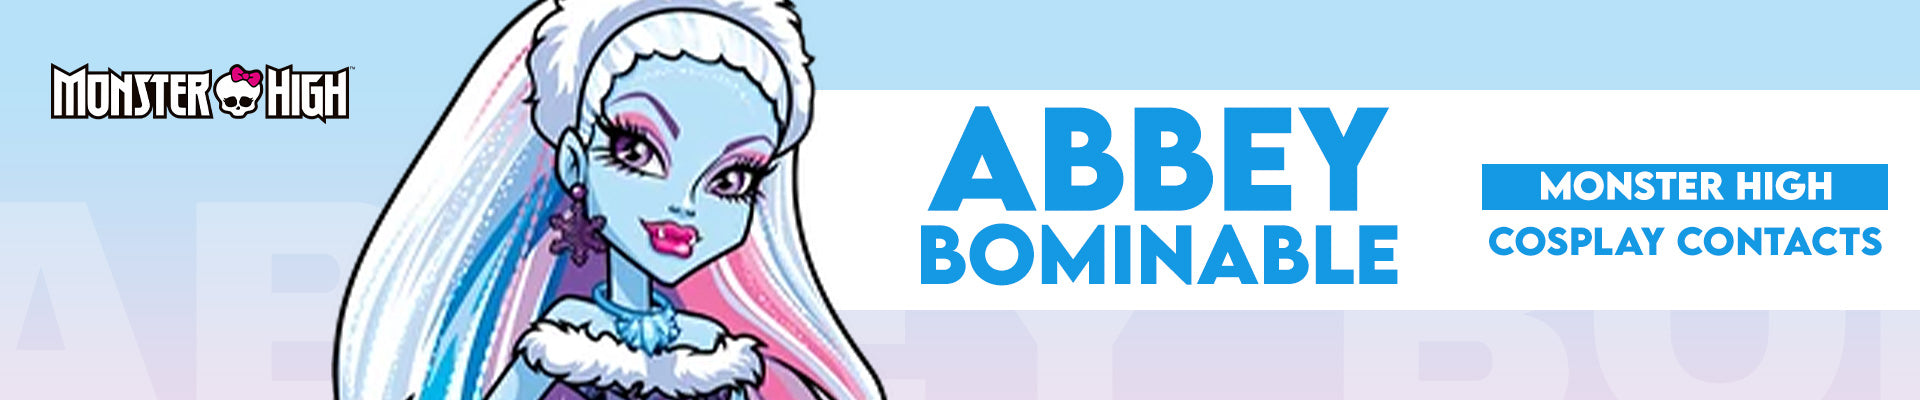 Abbey Bominable (Monster High) Cosplay Lenses